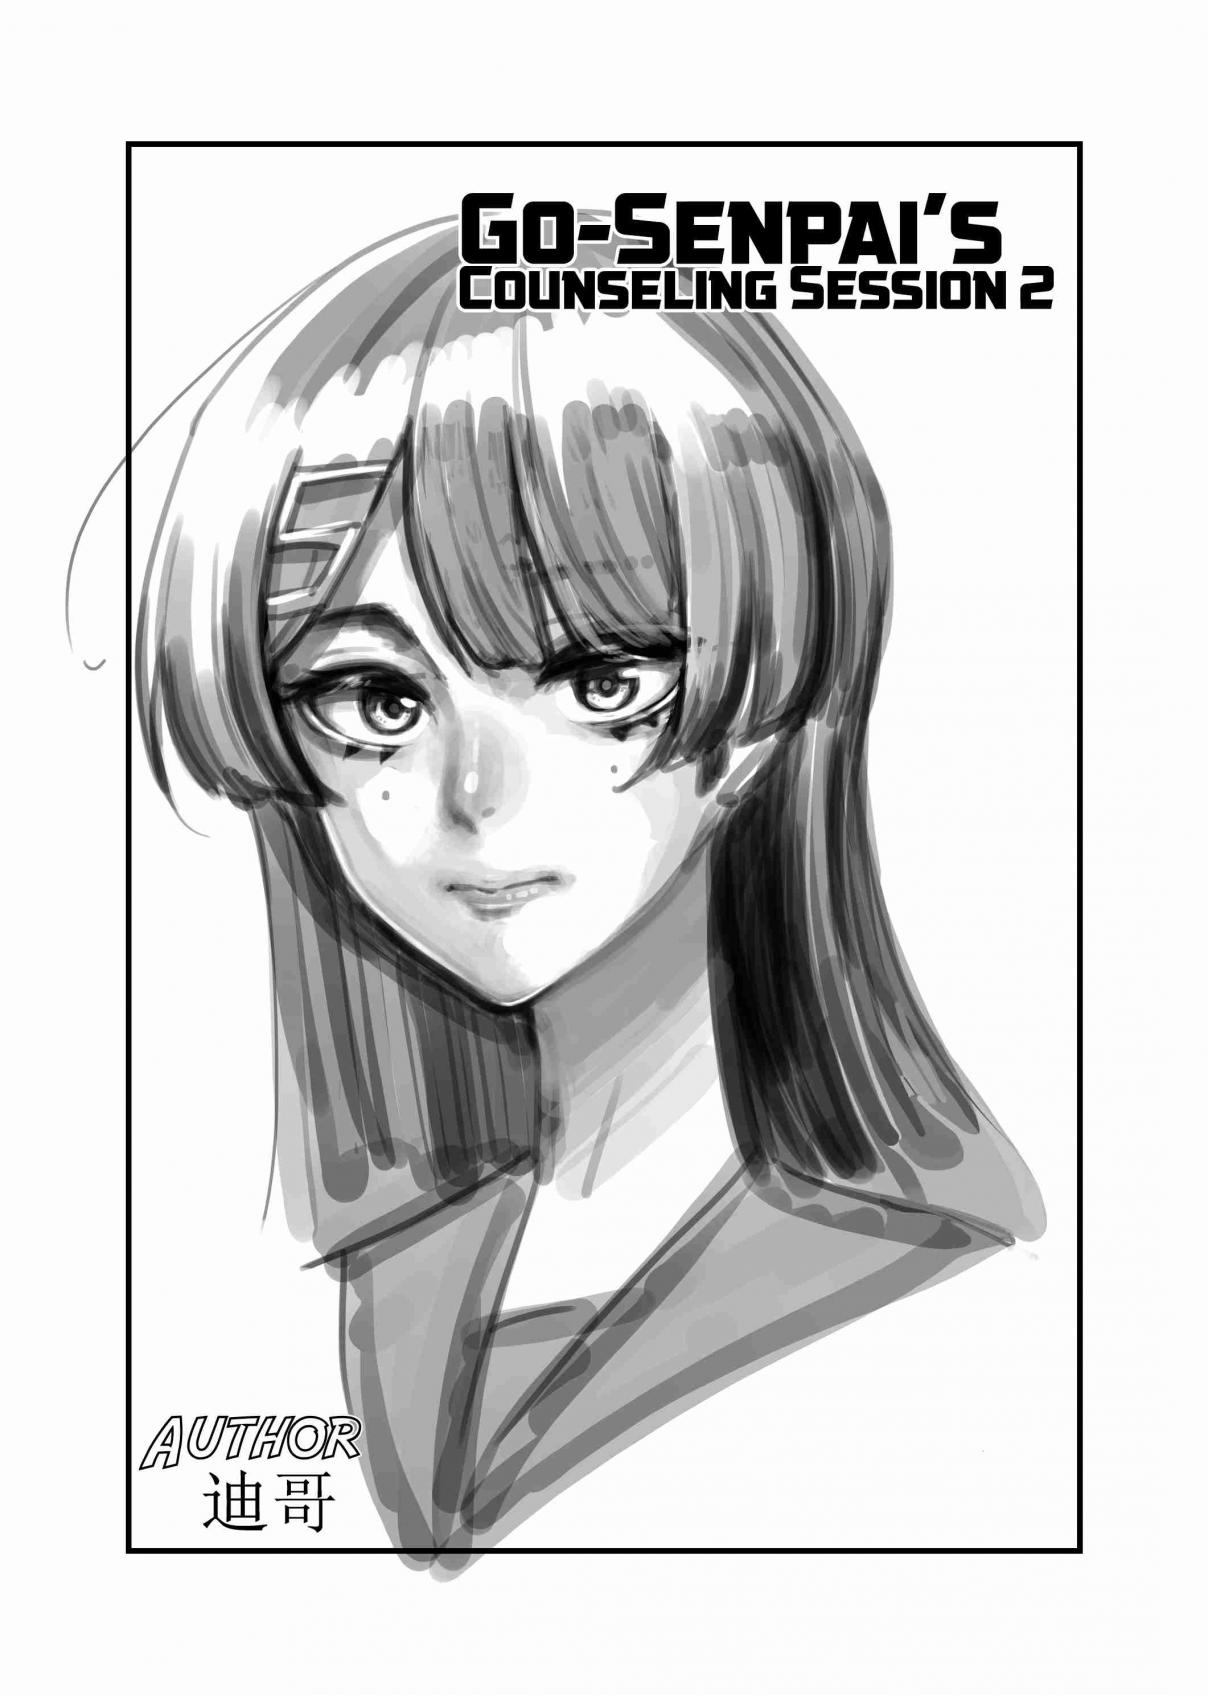 Go-senpai's Counselling Session 2